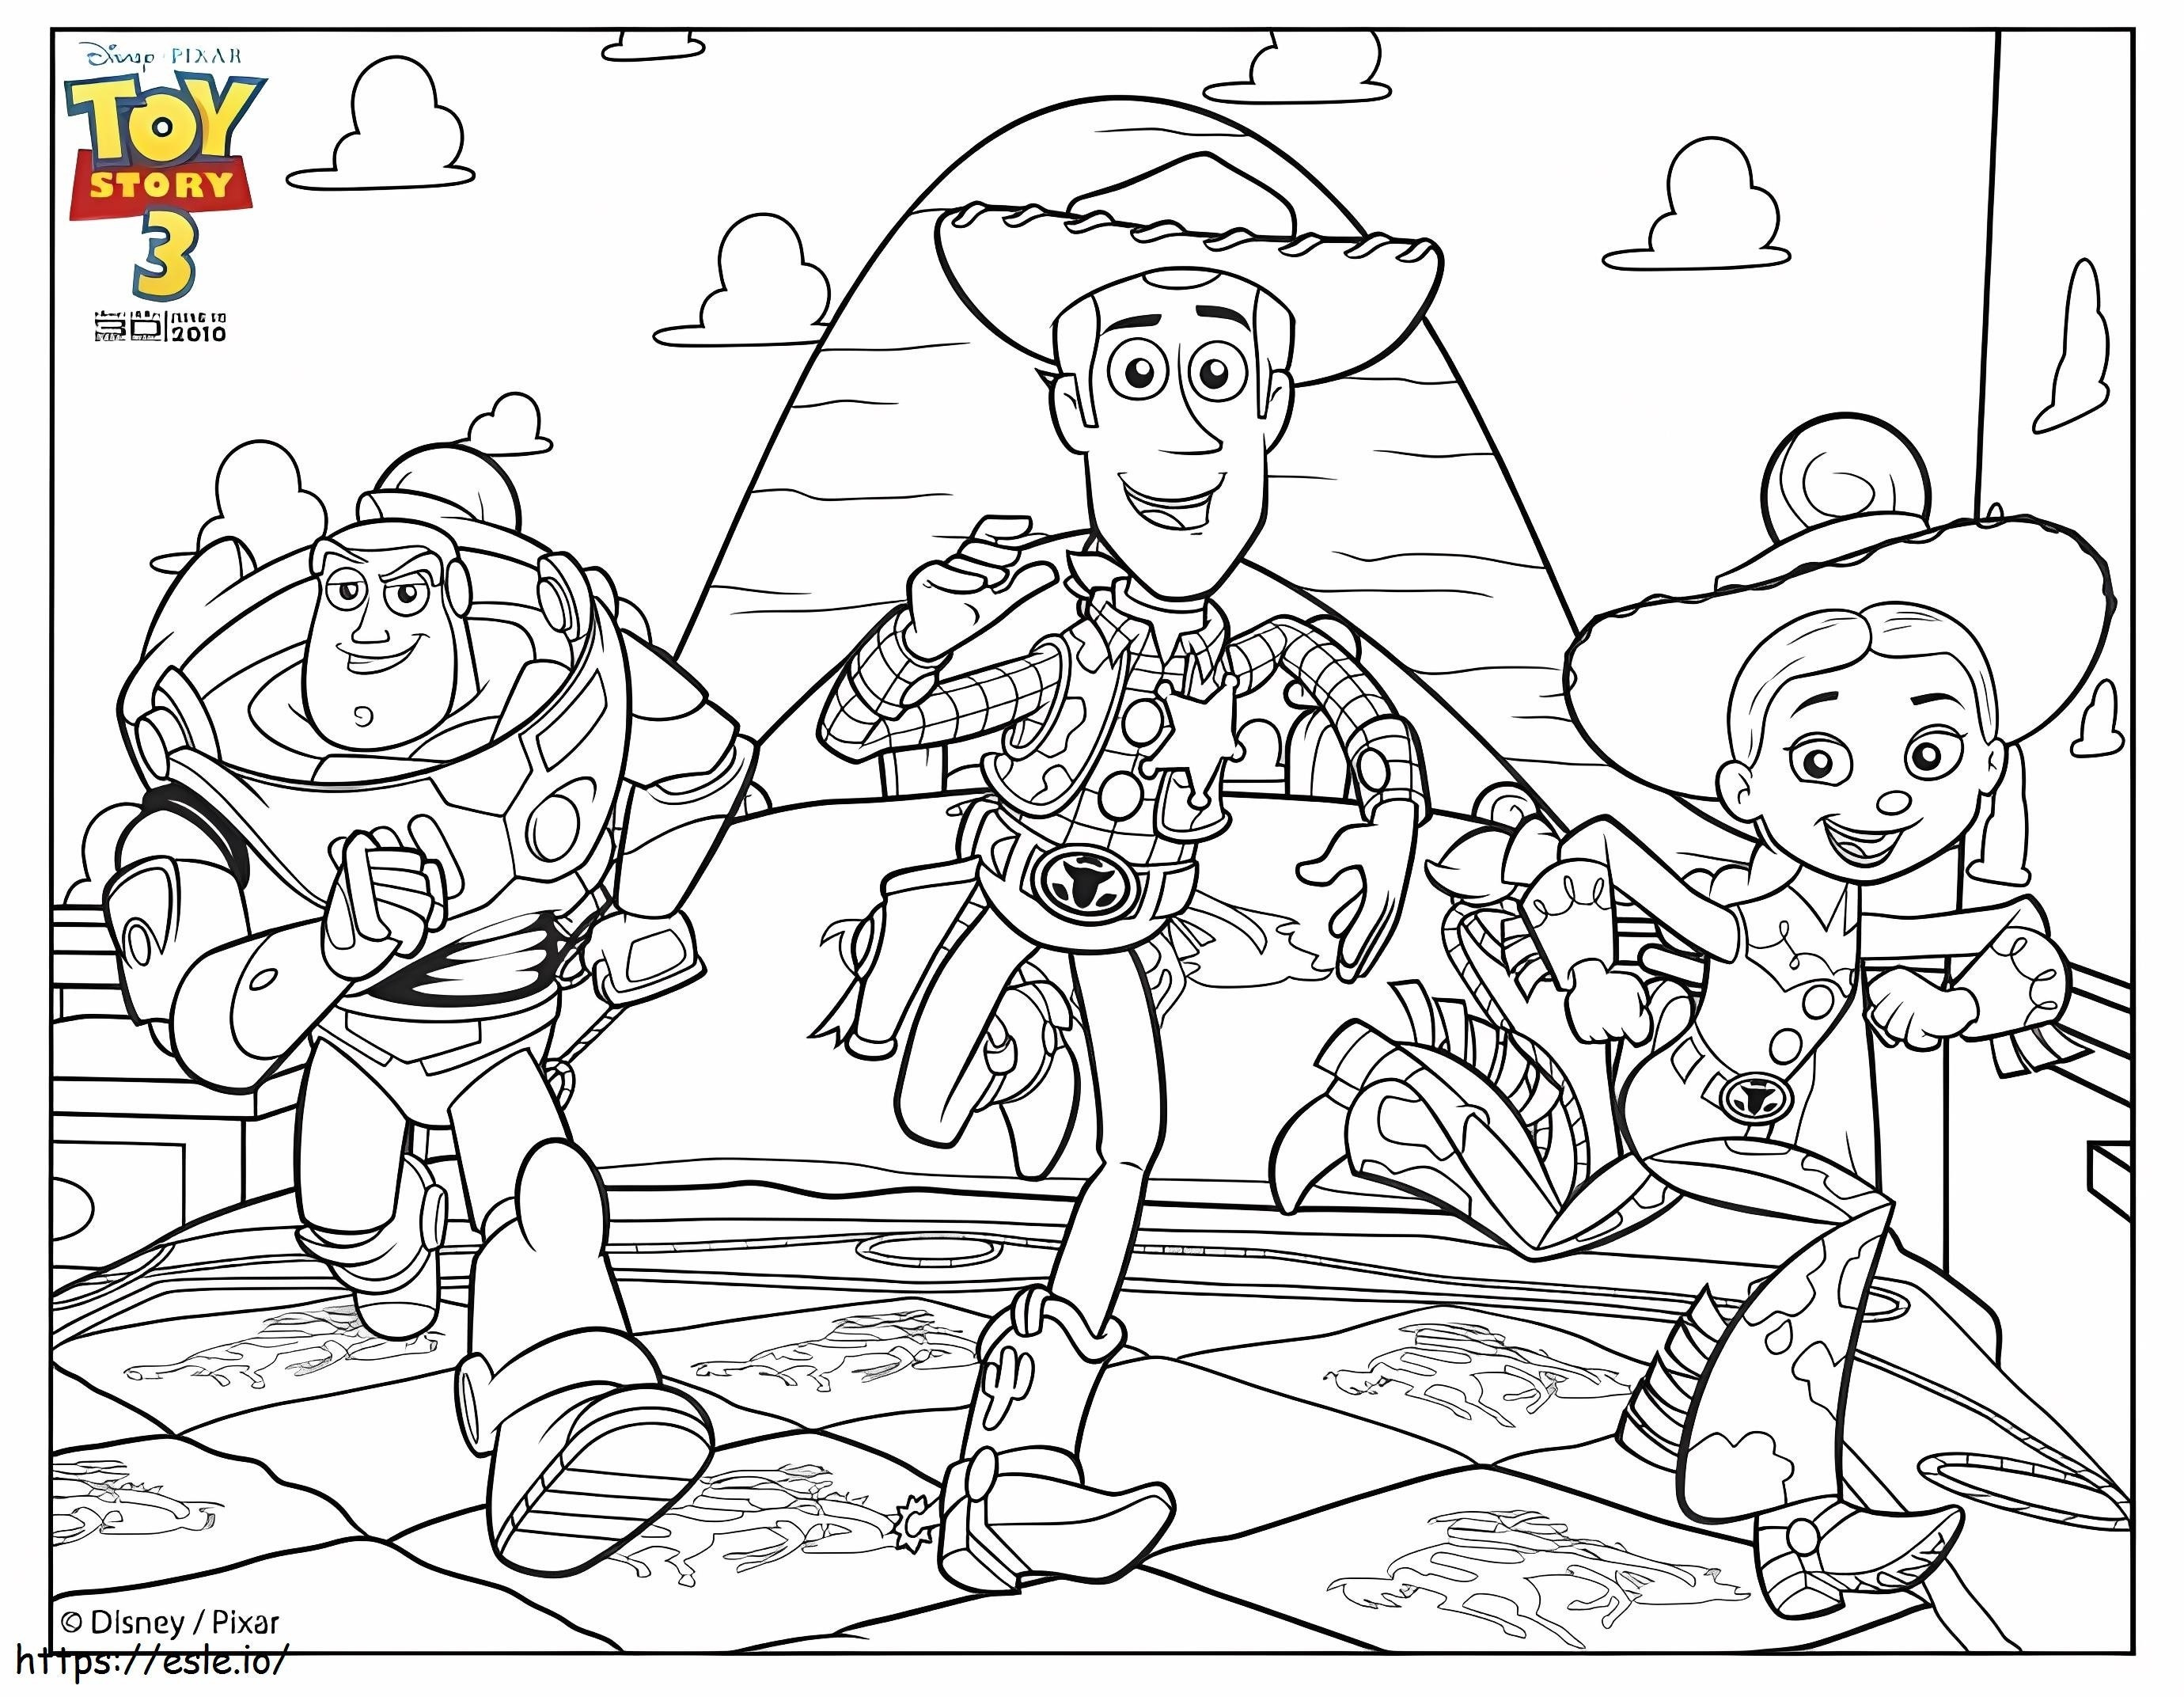 1559875683 Buzz Woody Jessie A4 coloring page